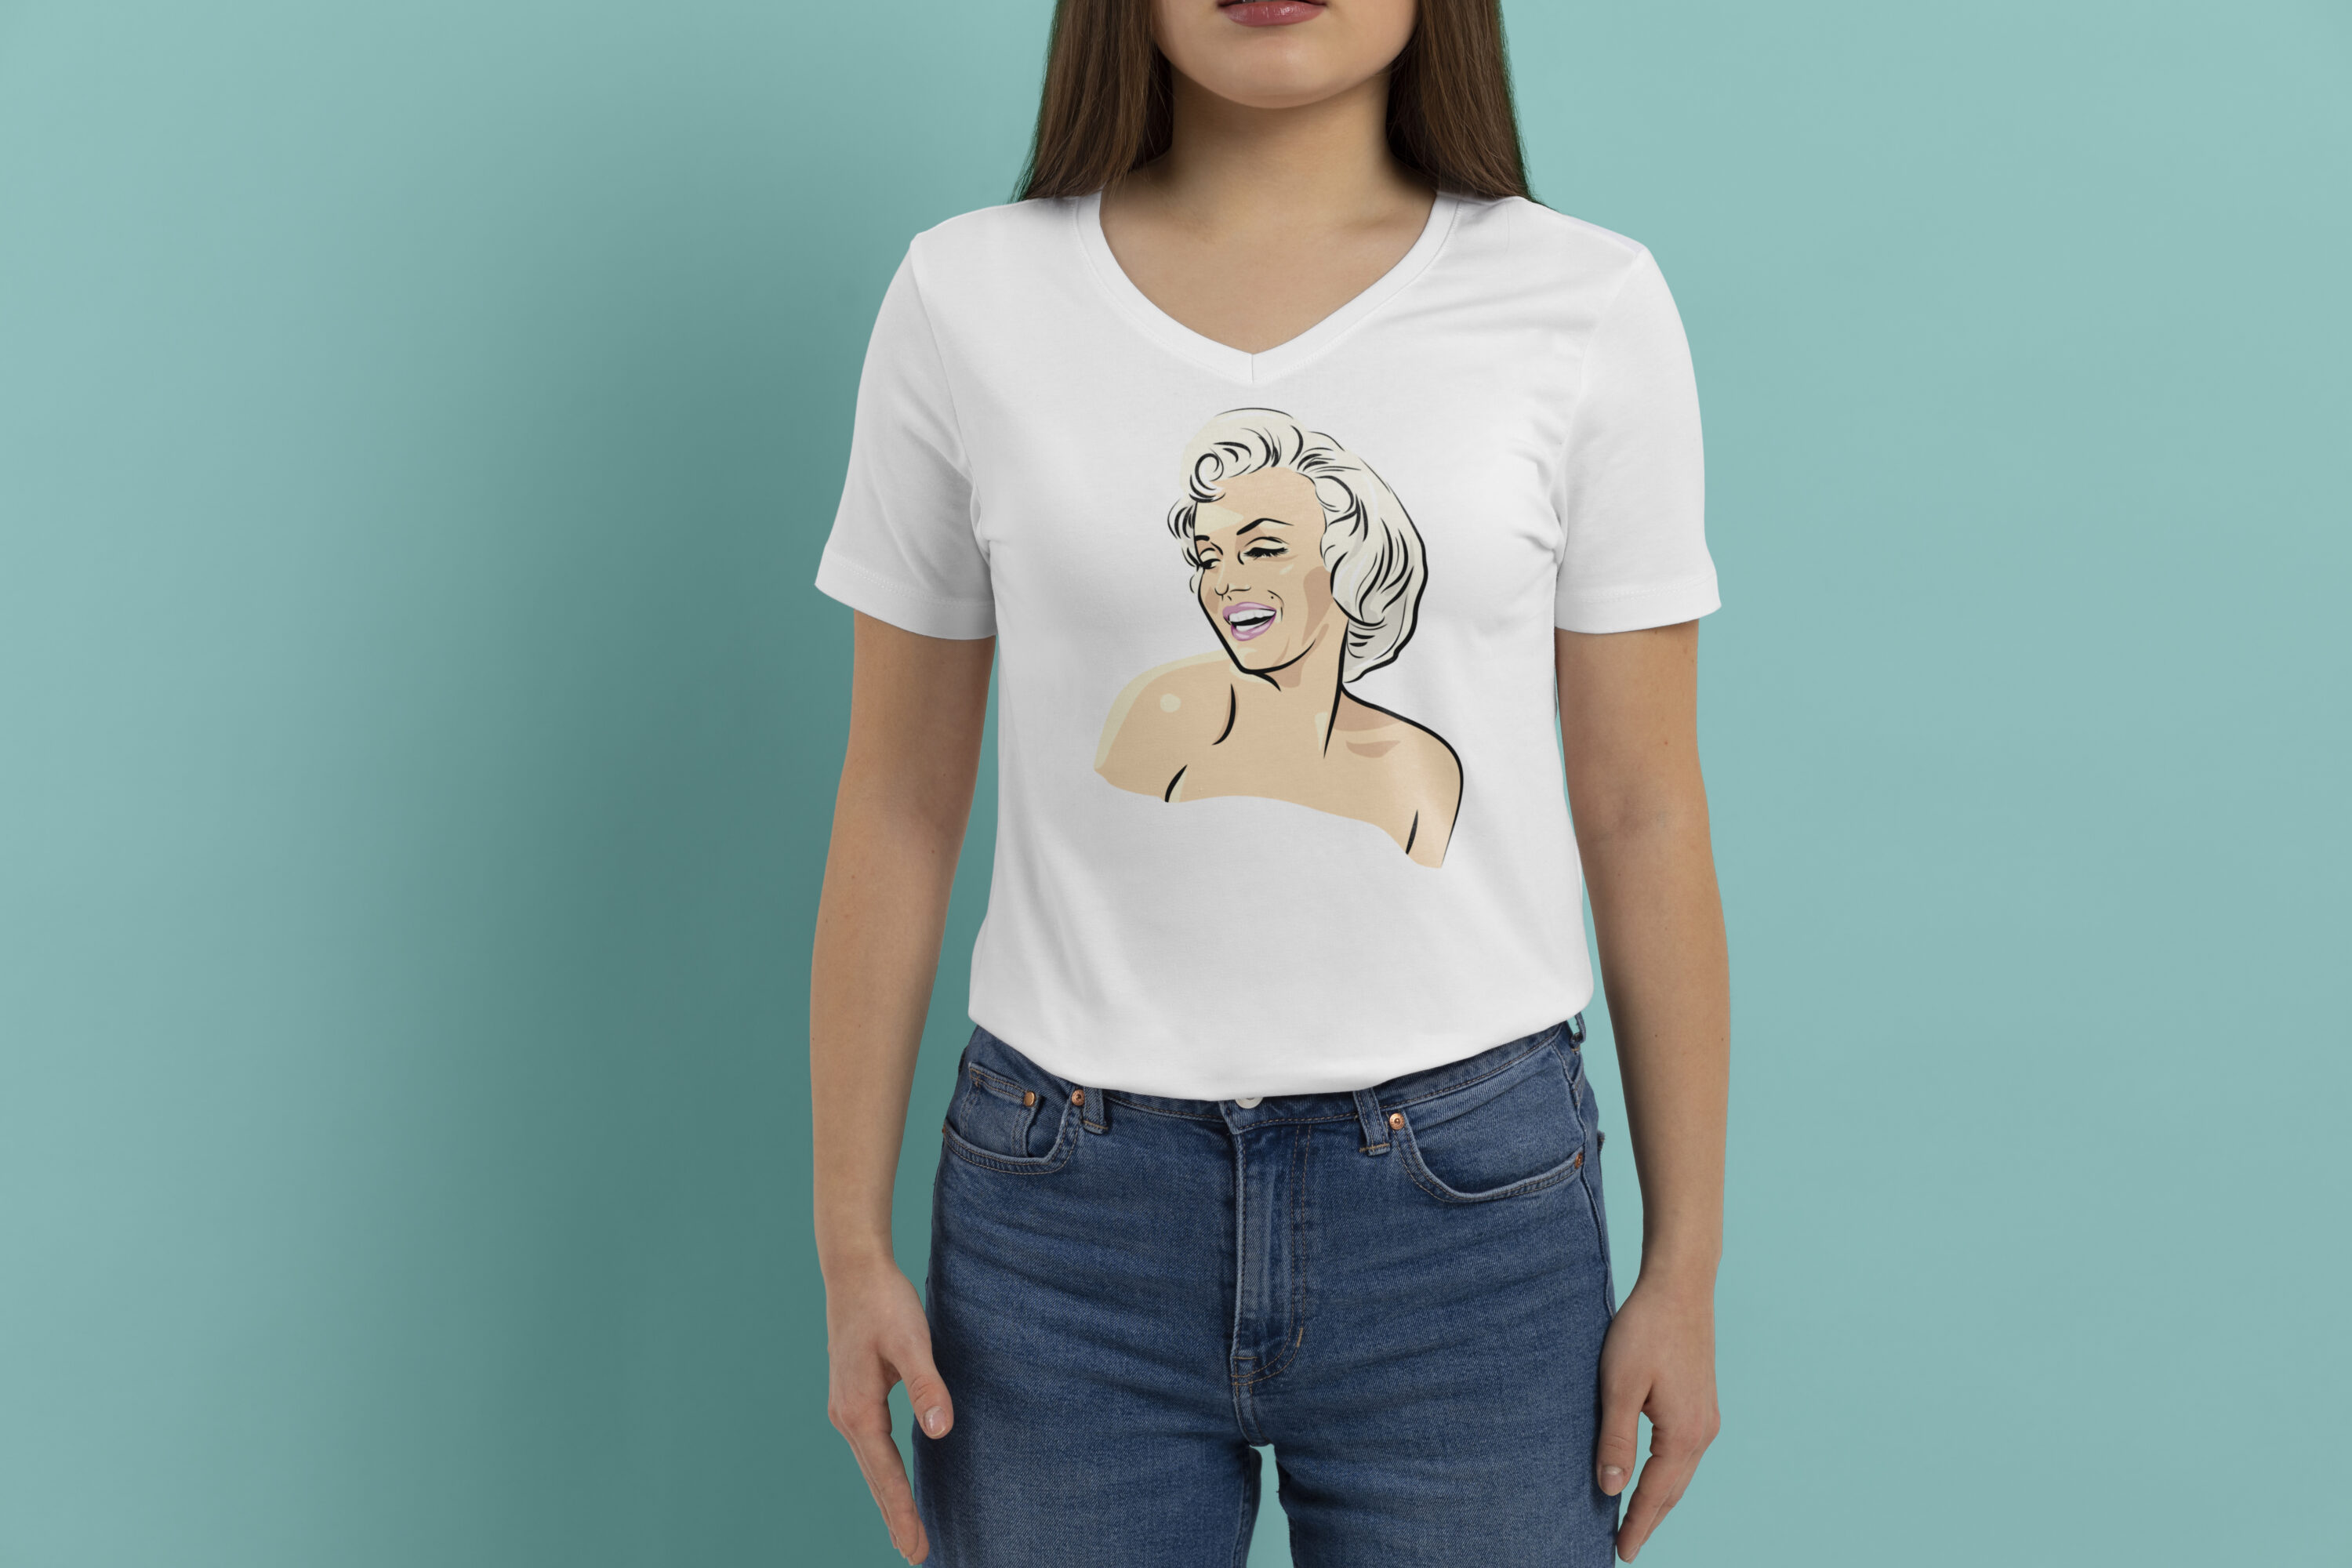 Image of a white t-shirt with a cartoon print of Marilyn Monroe.